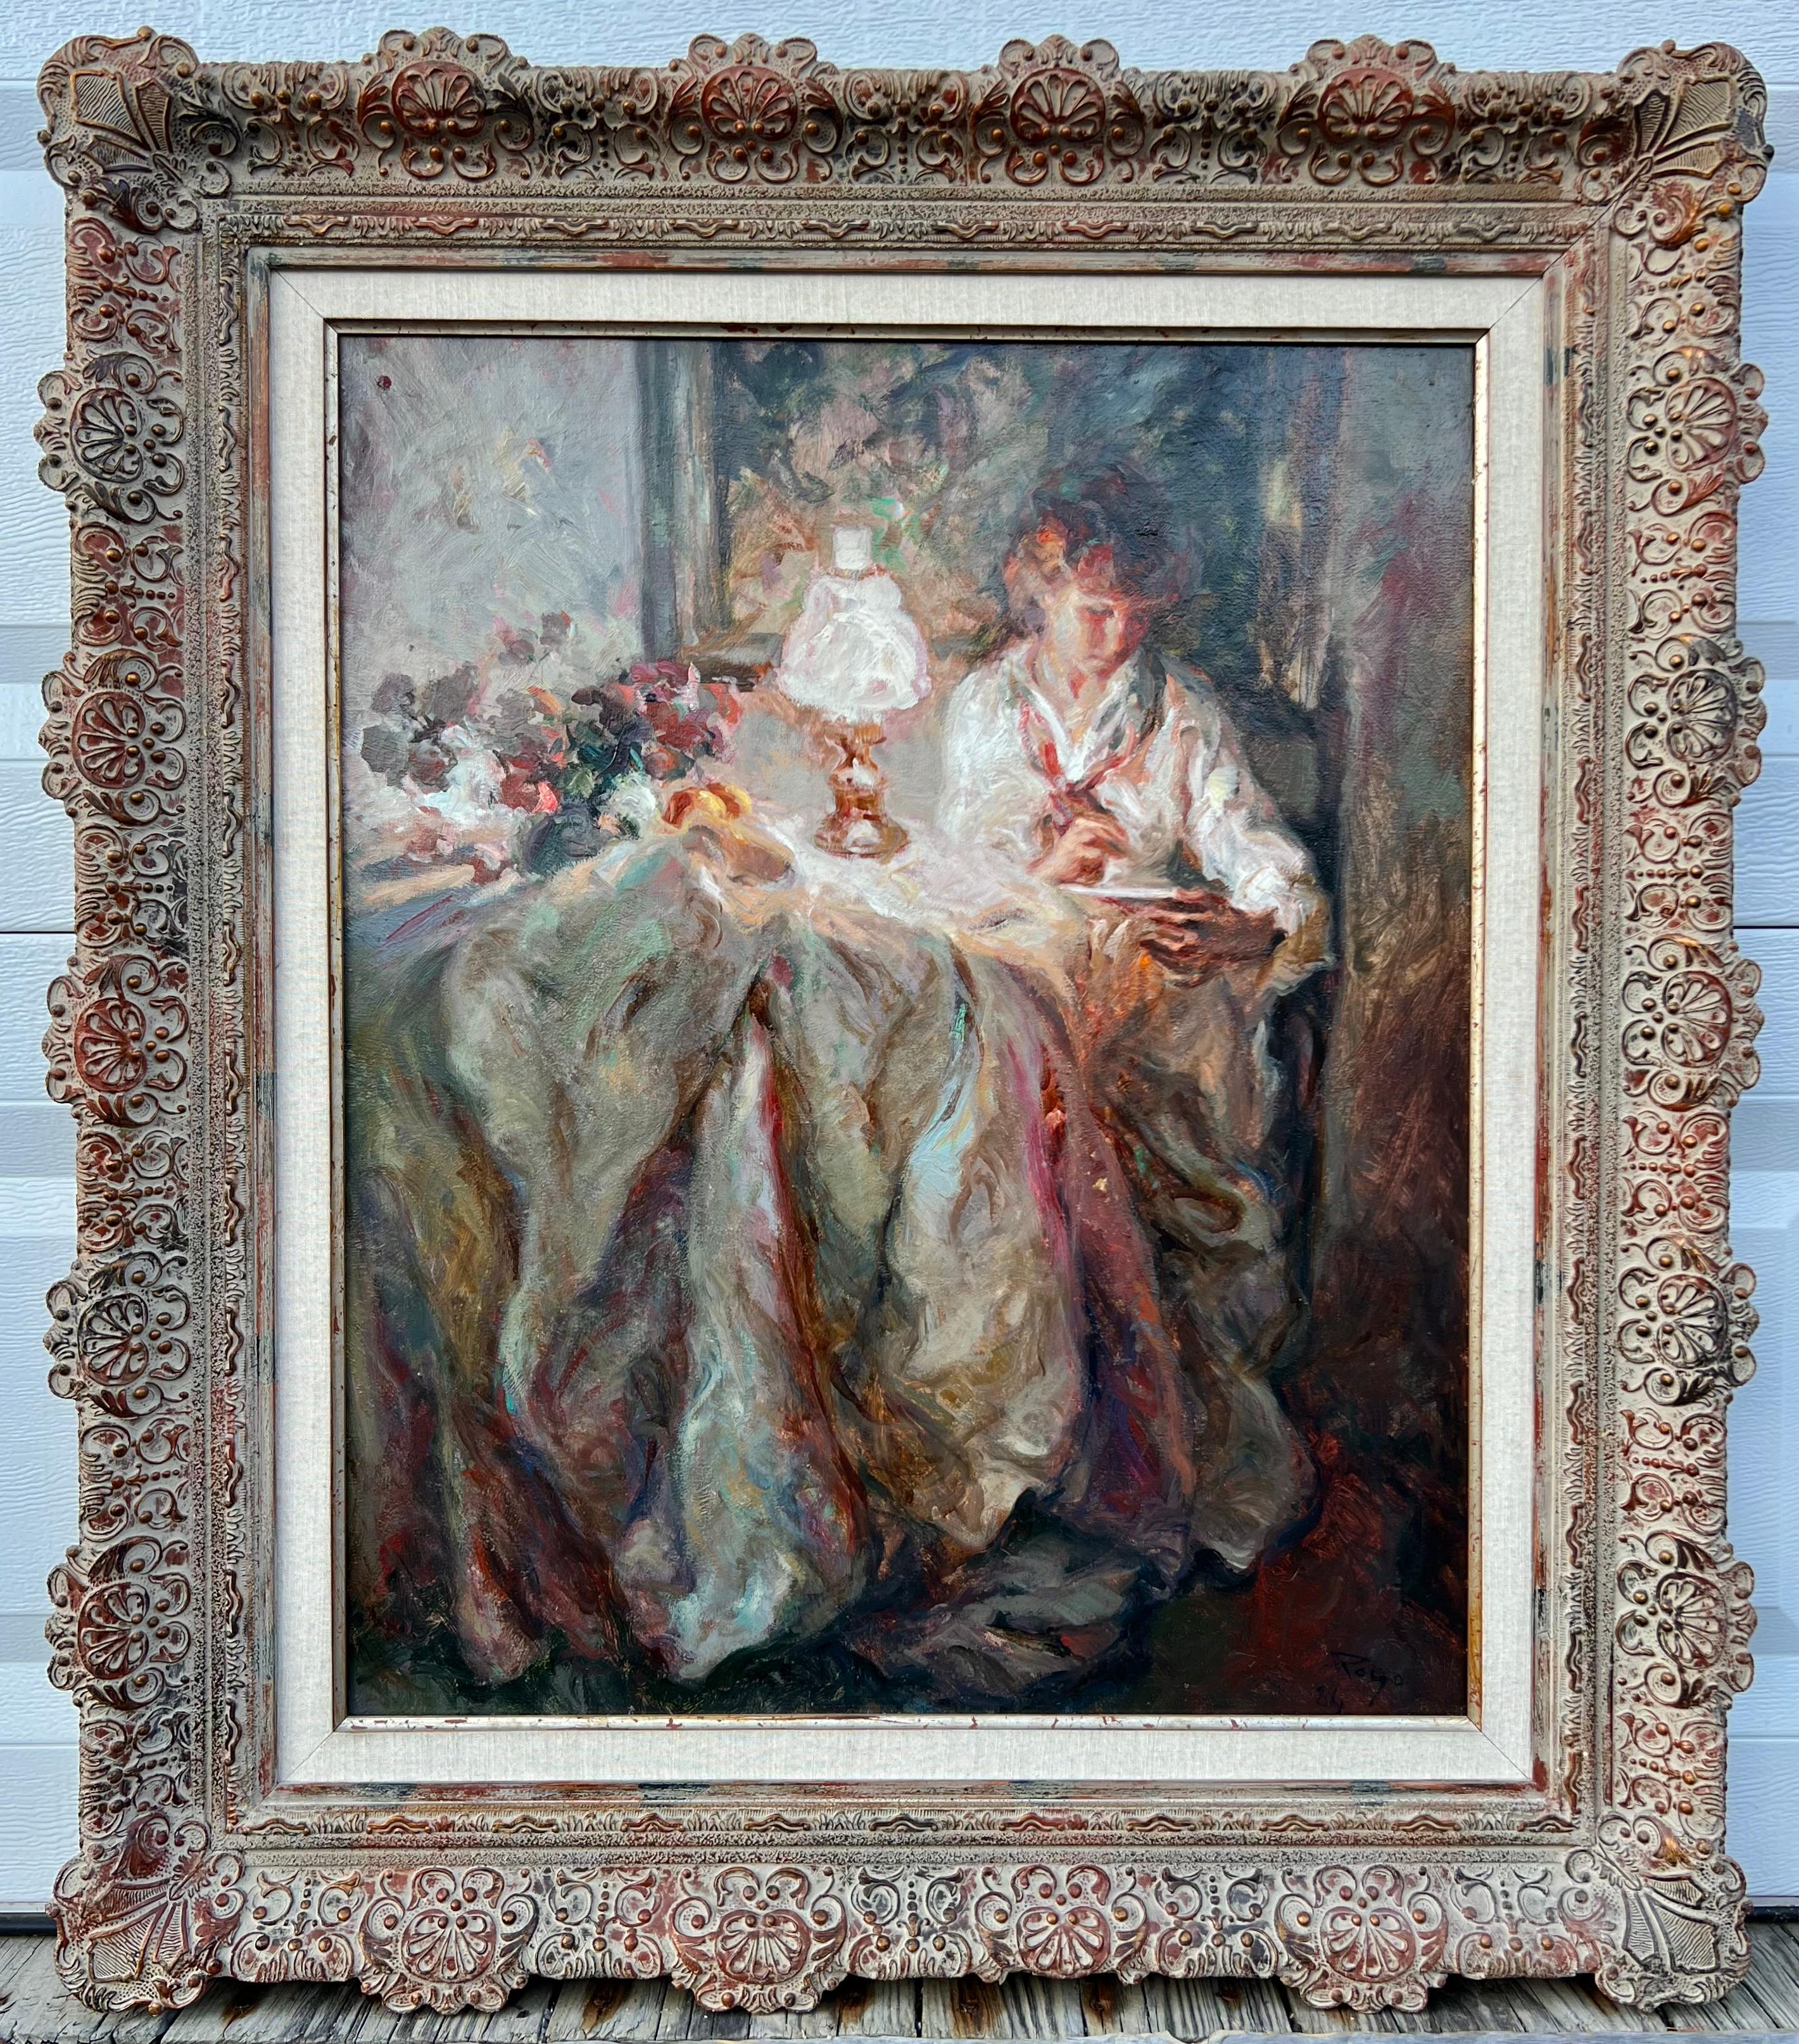 Oil on canvas, signed and dated in the lower right corner. Presented in a carved frame measuring 38.5